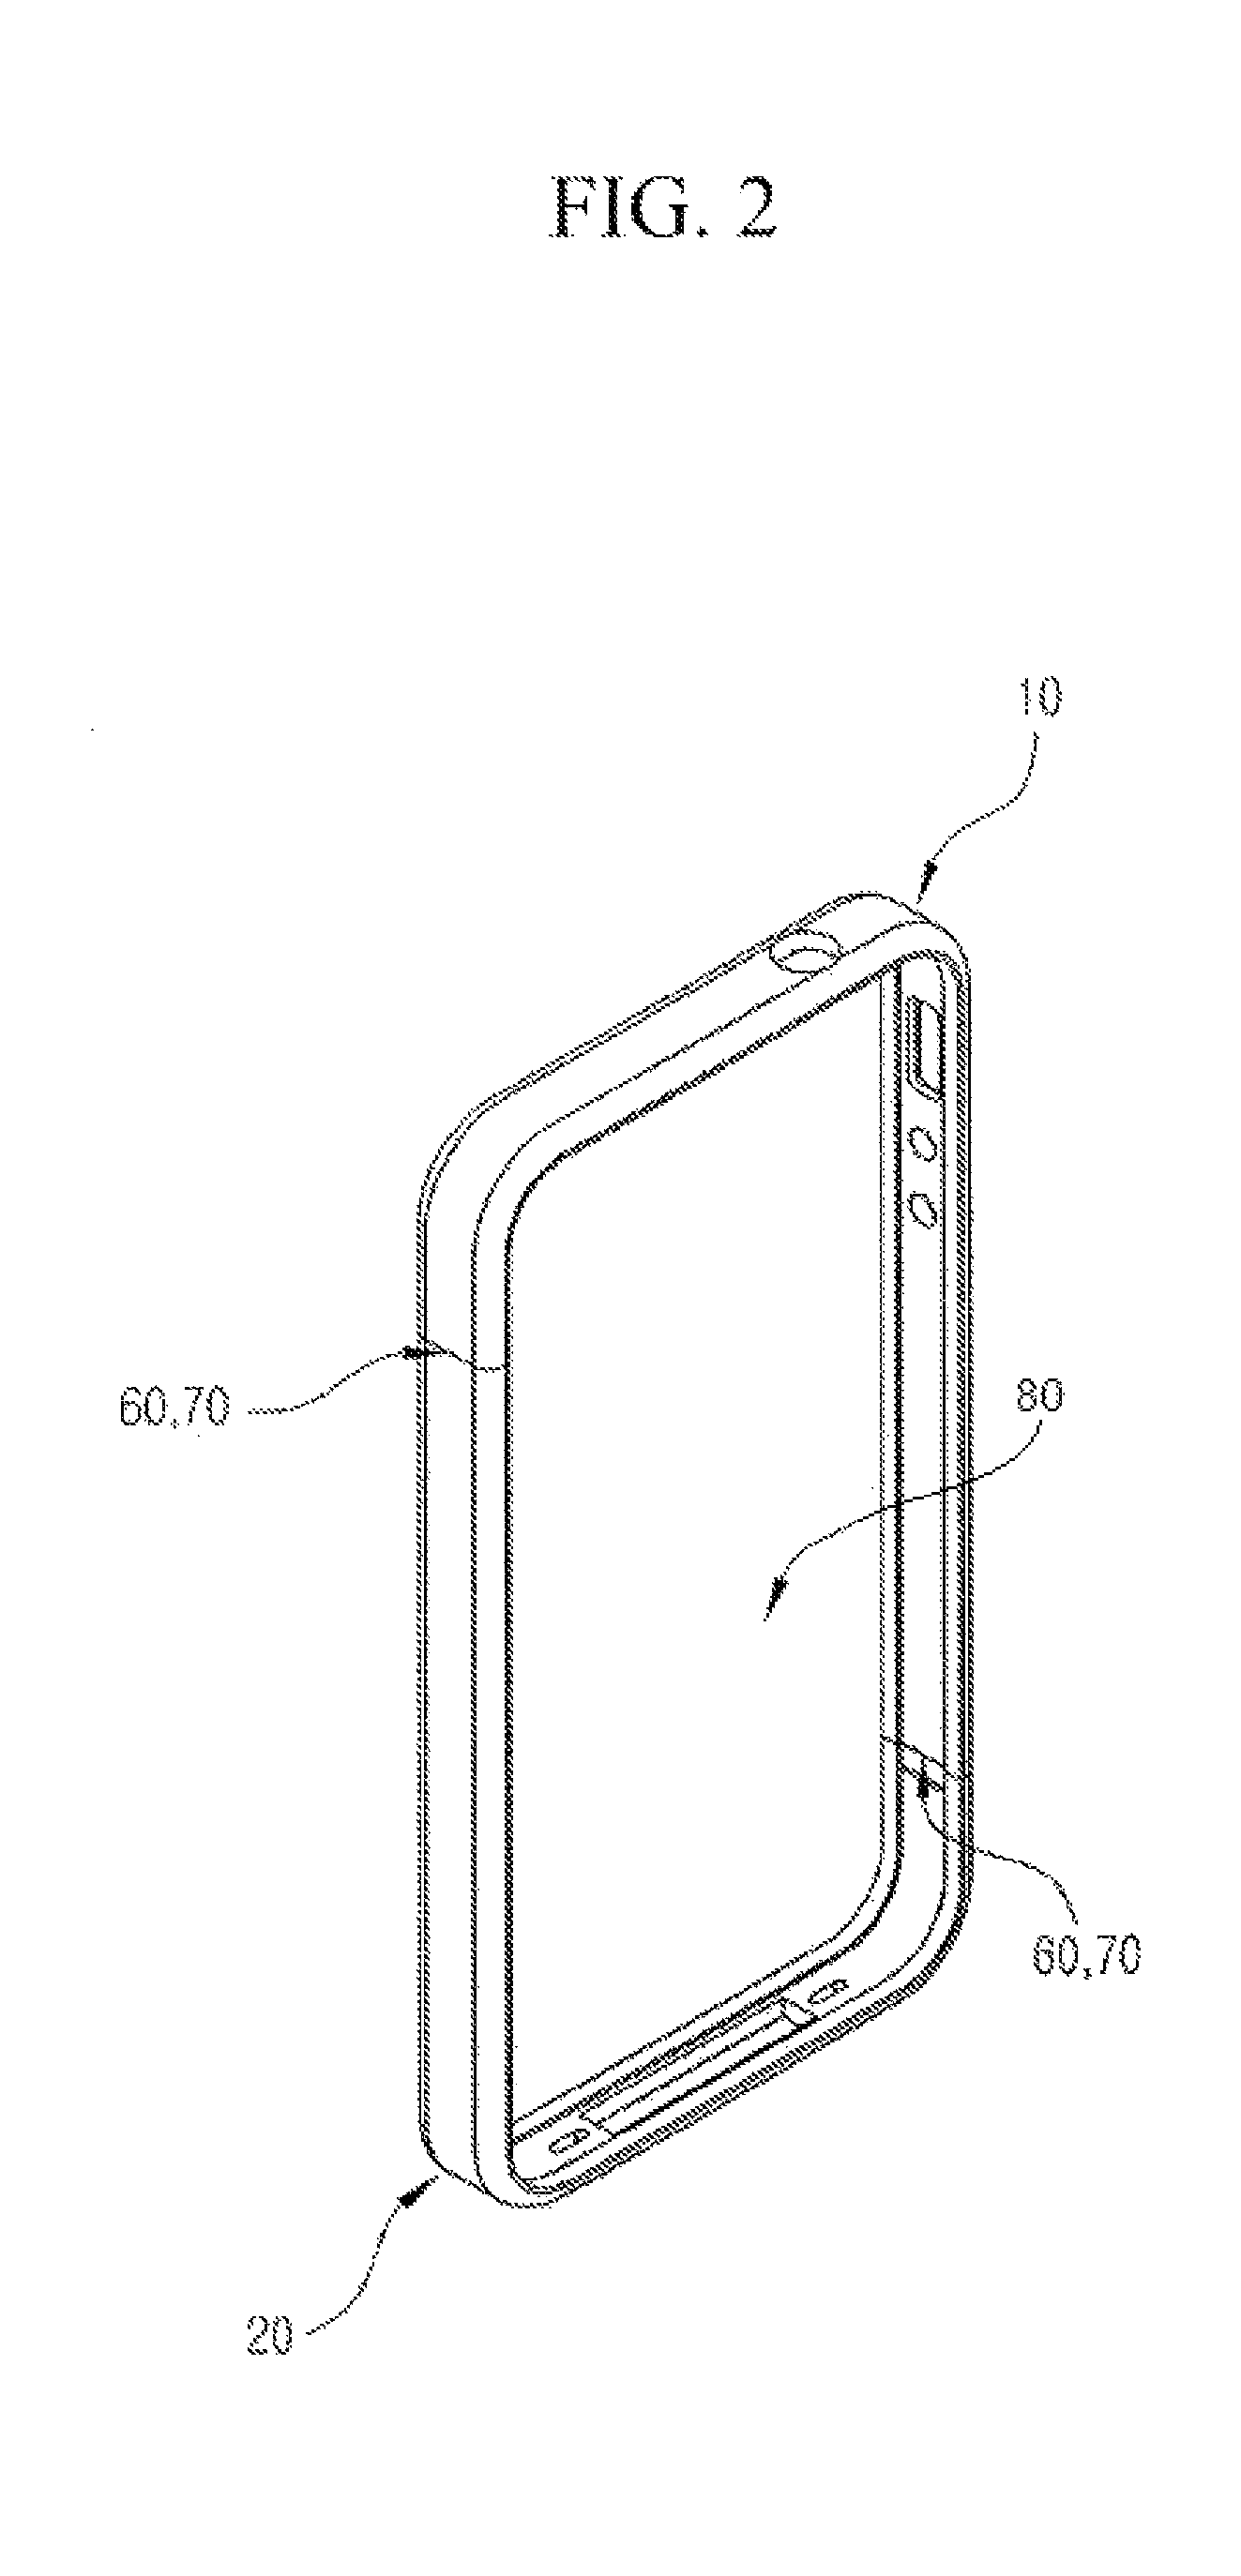 Protective case for portable electronic device